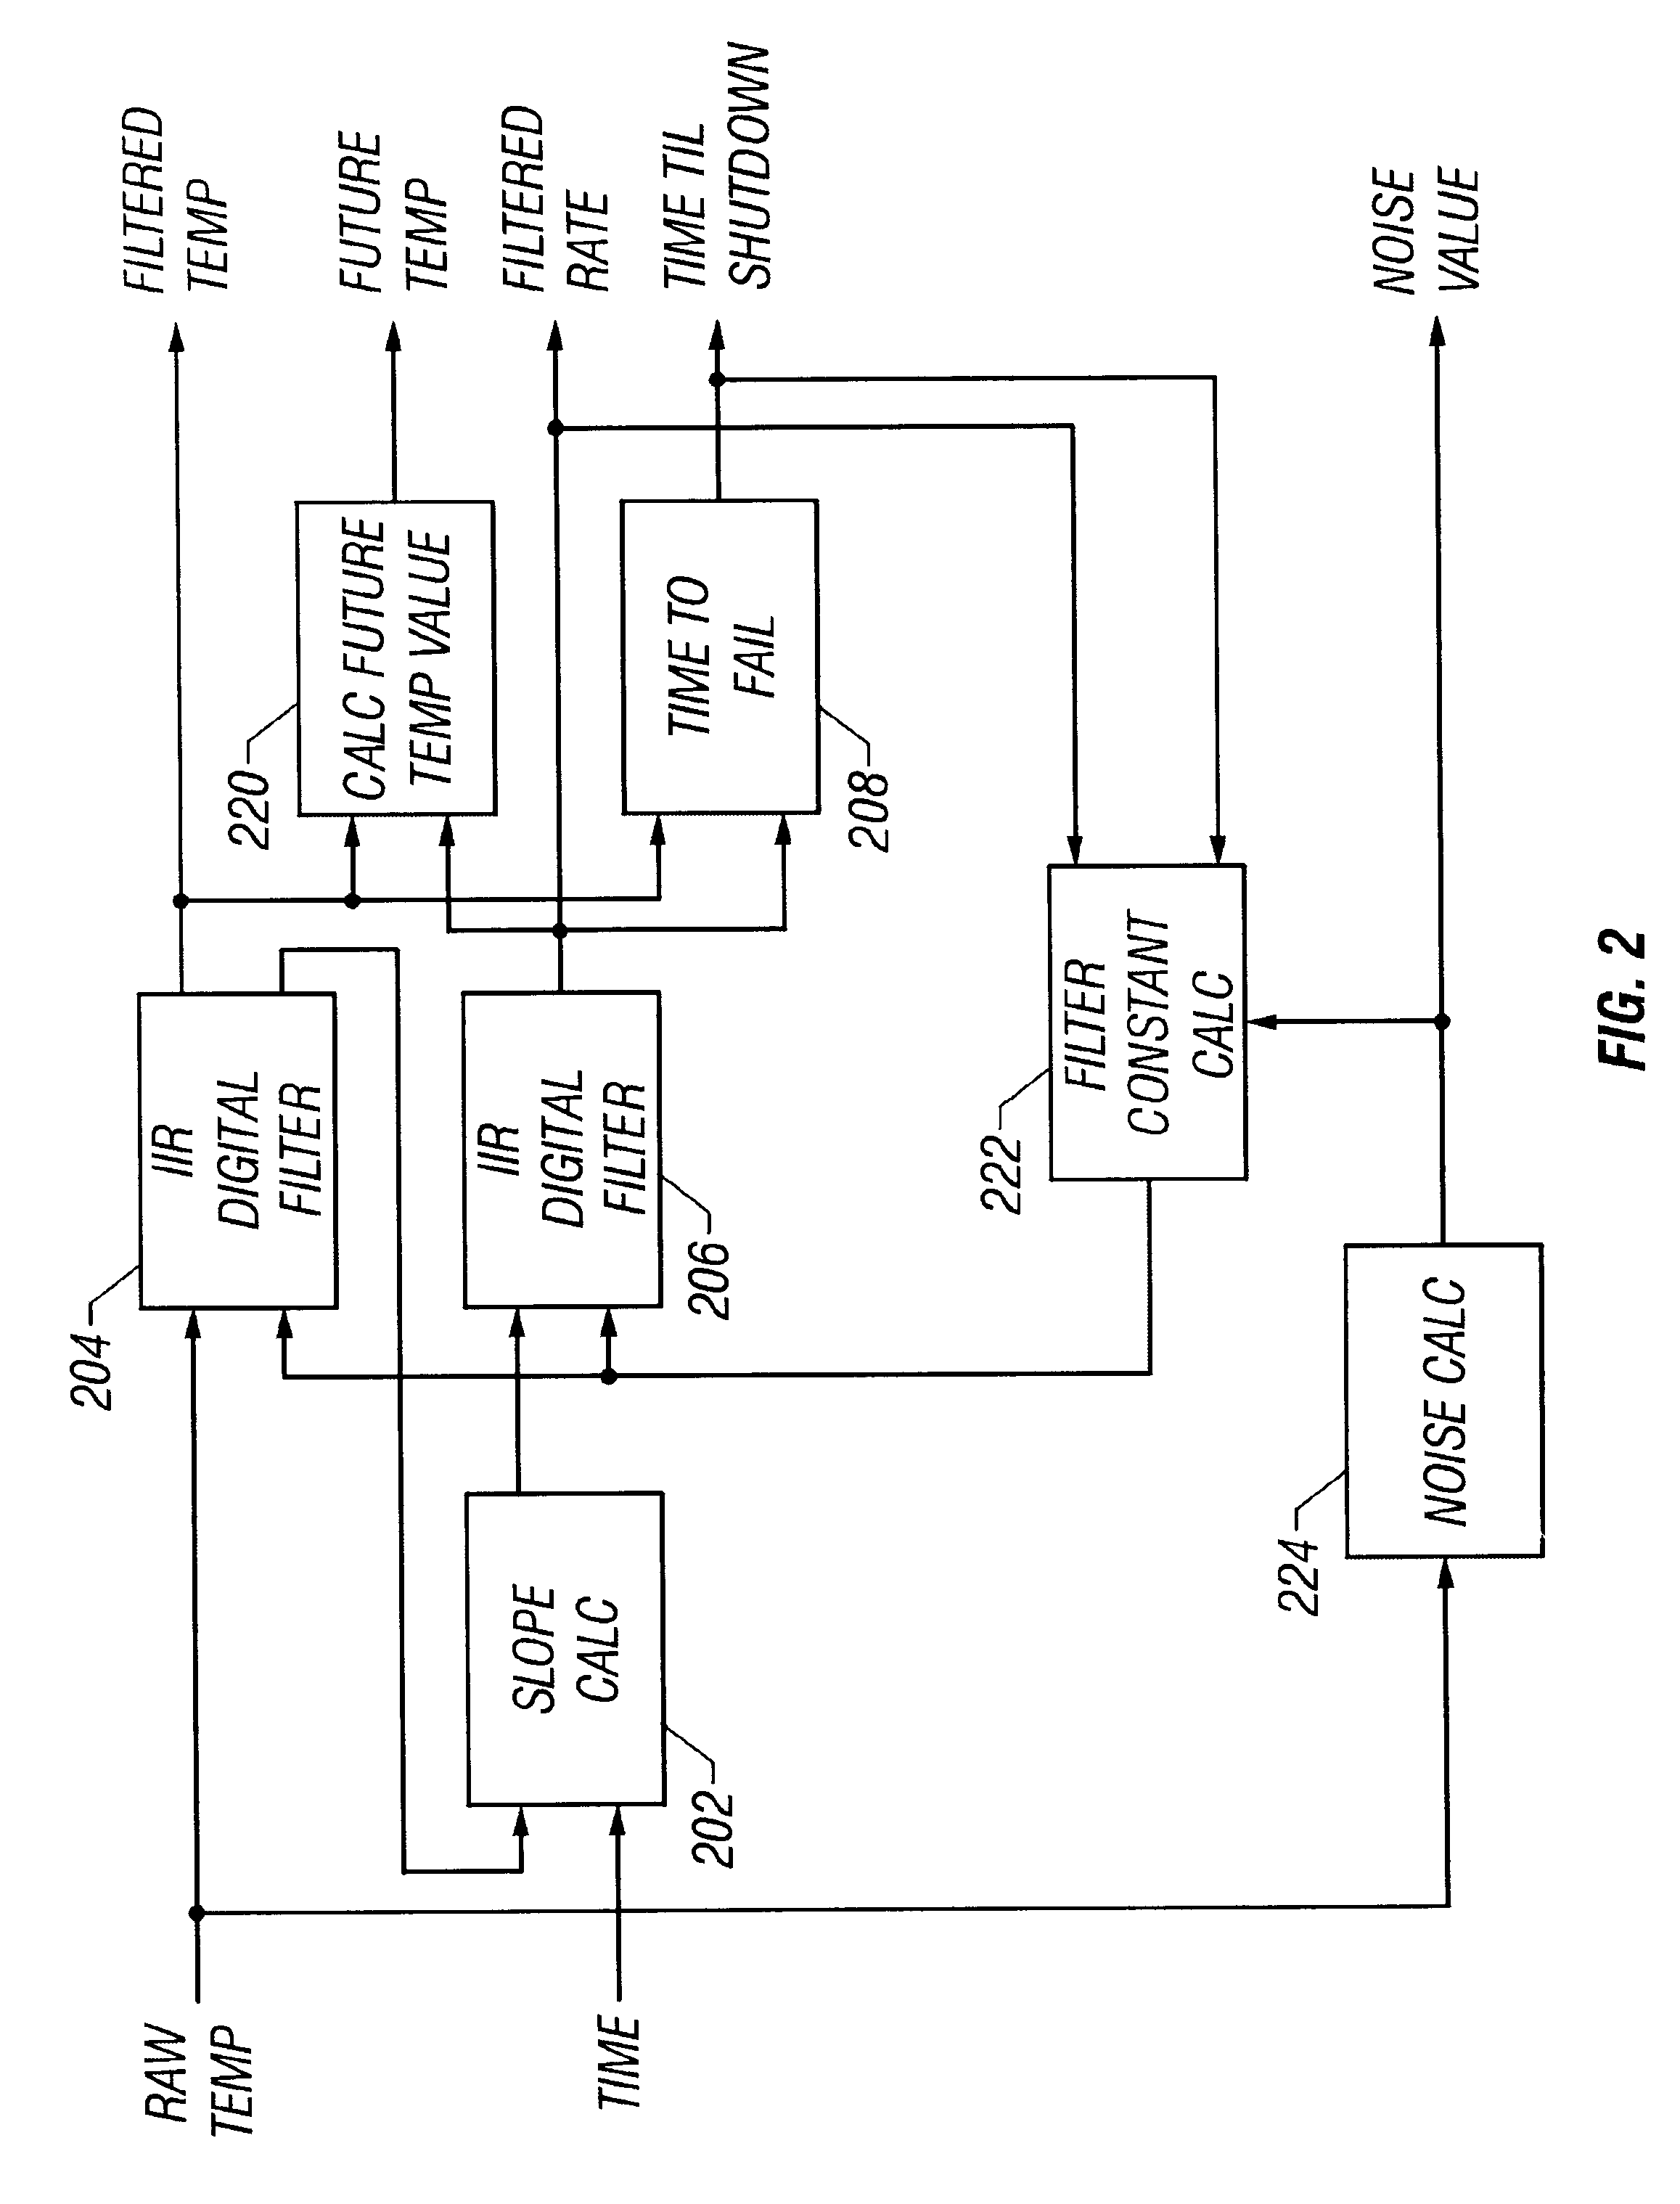 Thermal management data prediction system